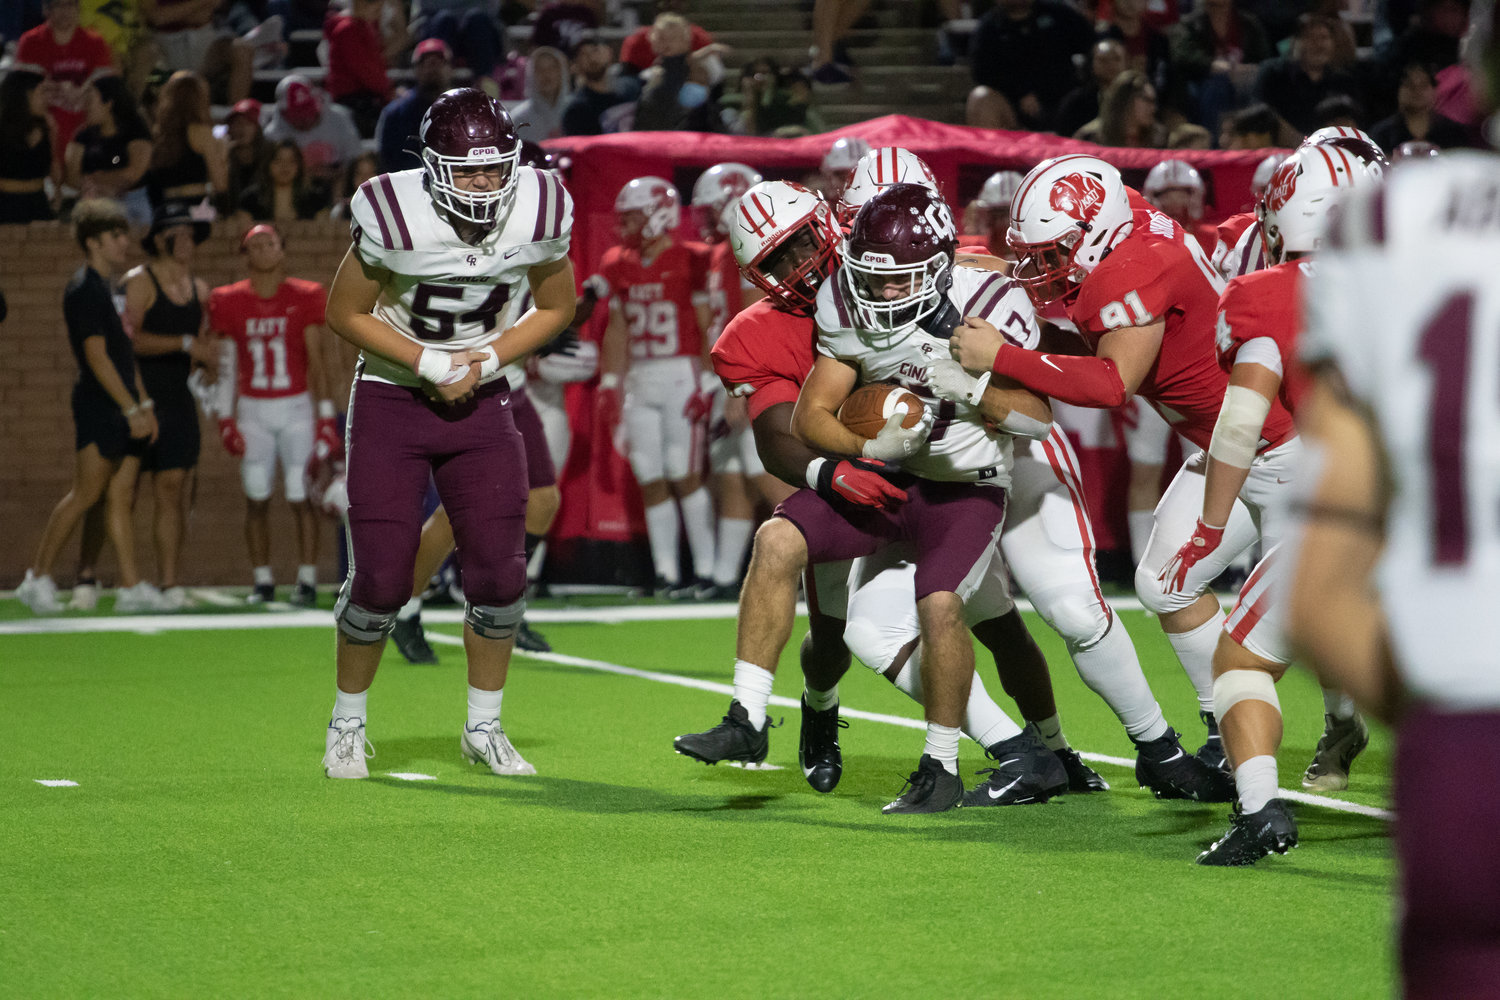 Cinco Ranch's Eric Eckstrom is wrapped up by Katy defenders during Friday's game between Katy and Cinco Ranch at Rhodes Stadium.